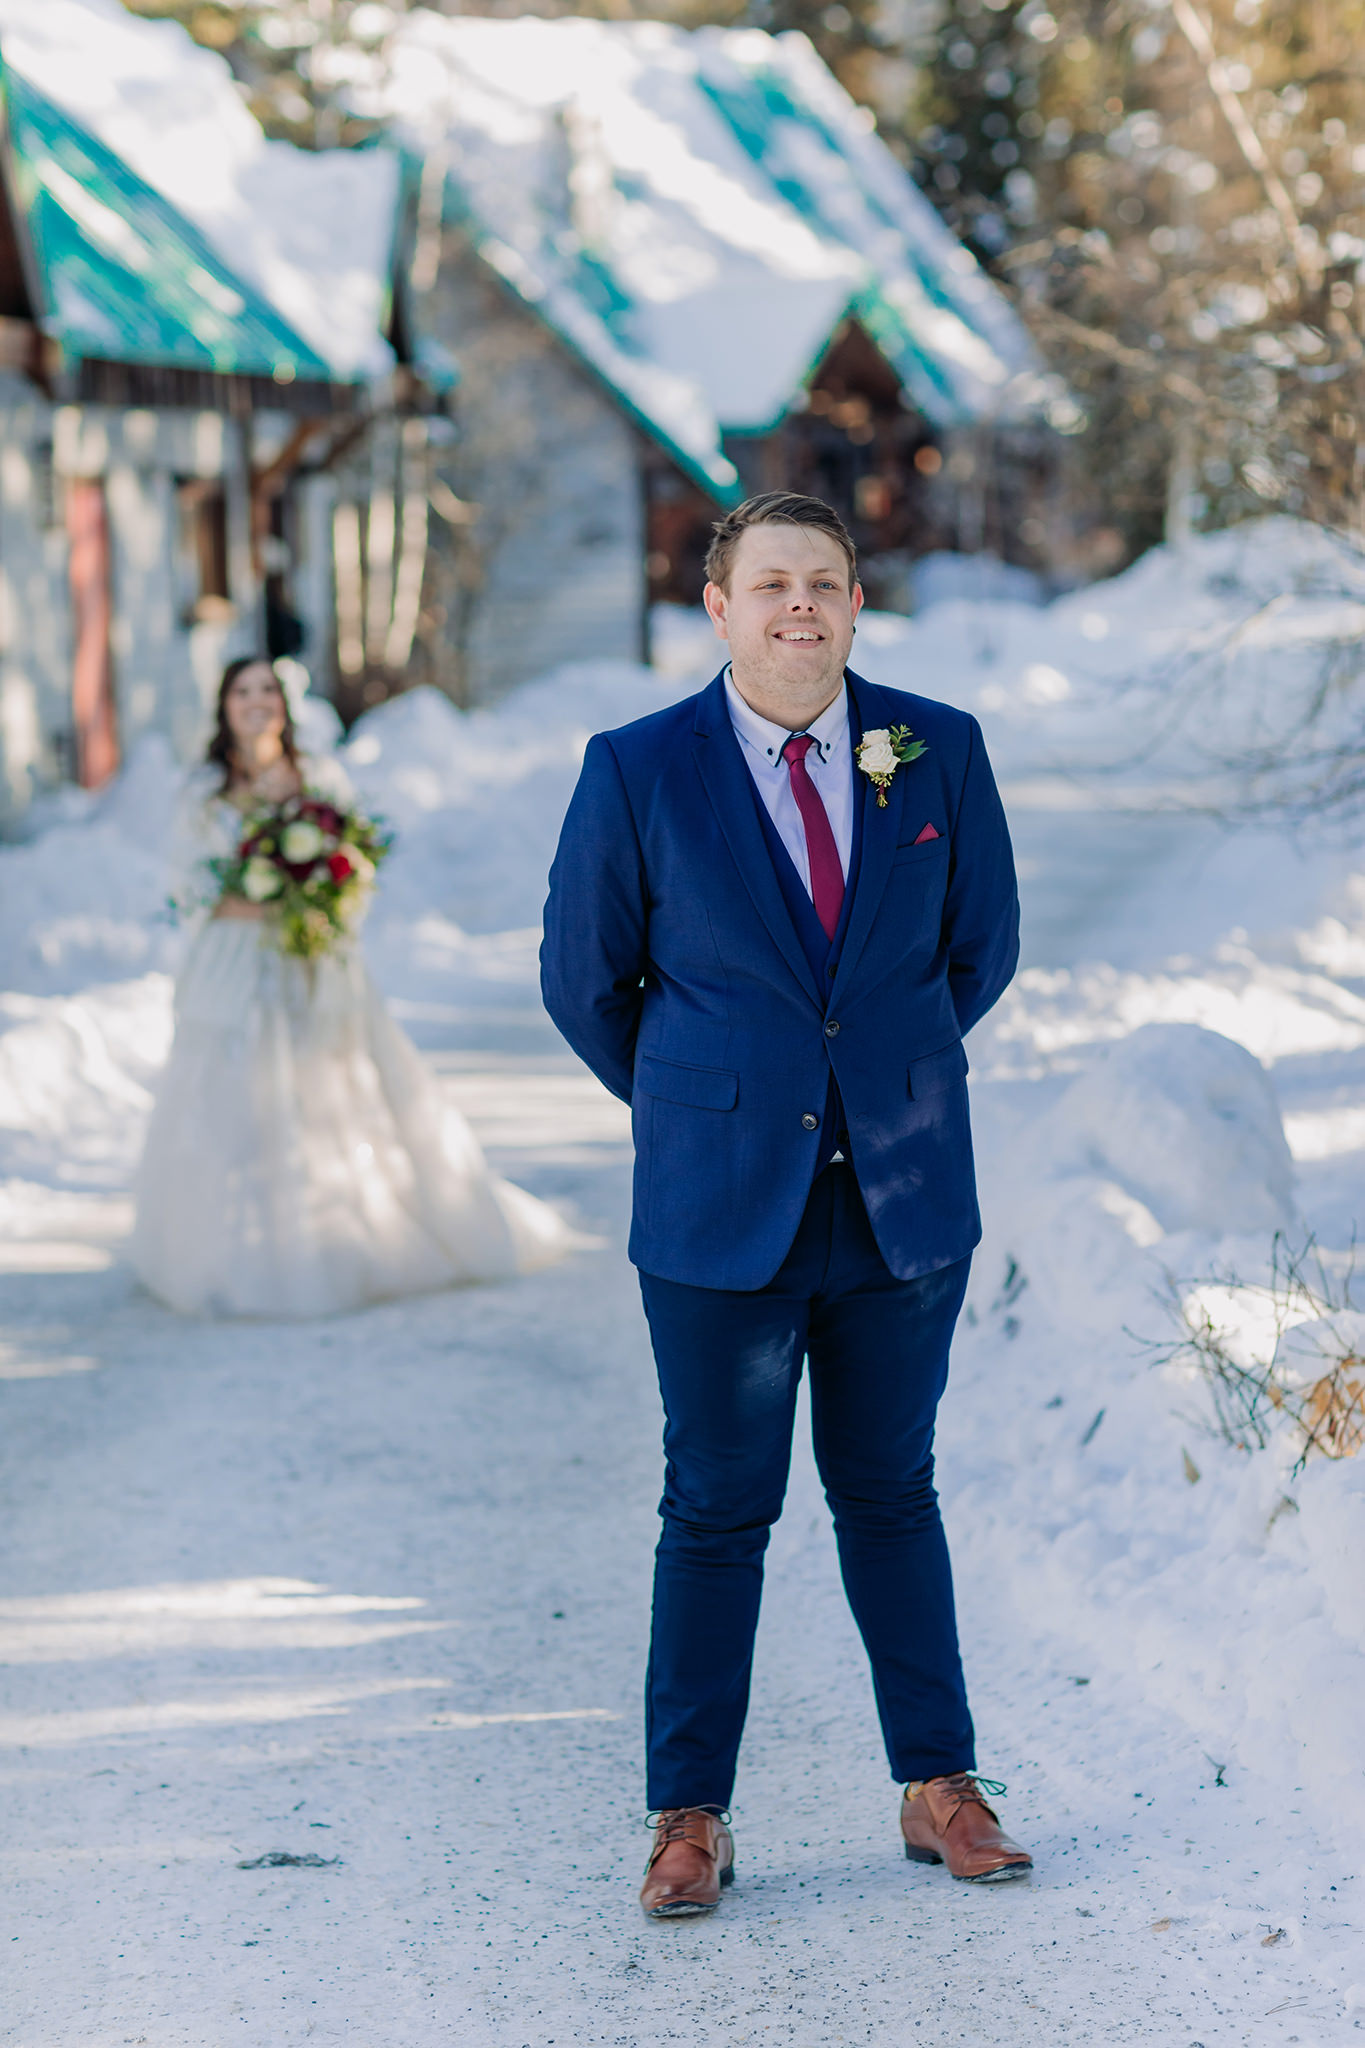 snowy first look between bride & groom at Emerald Lake Lodge in the mountains